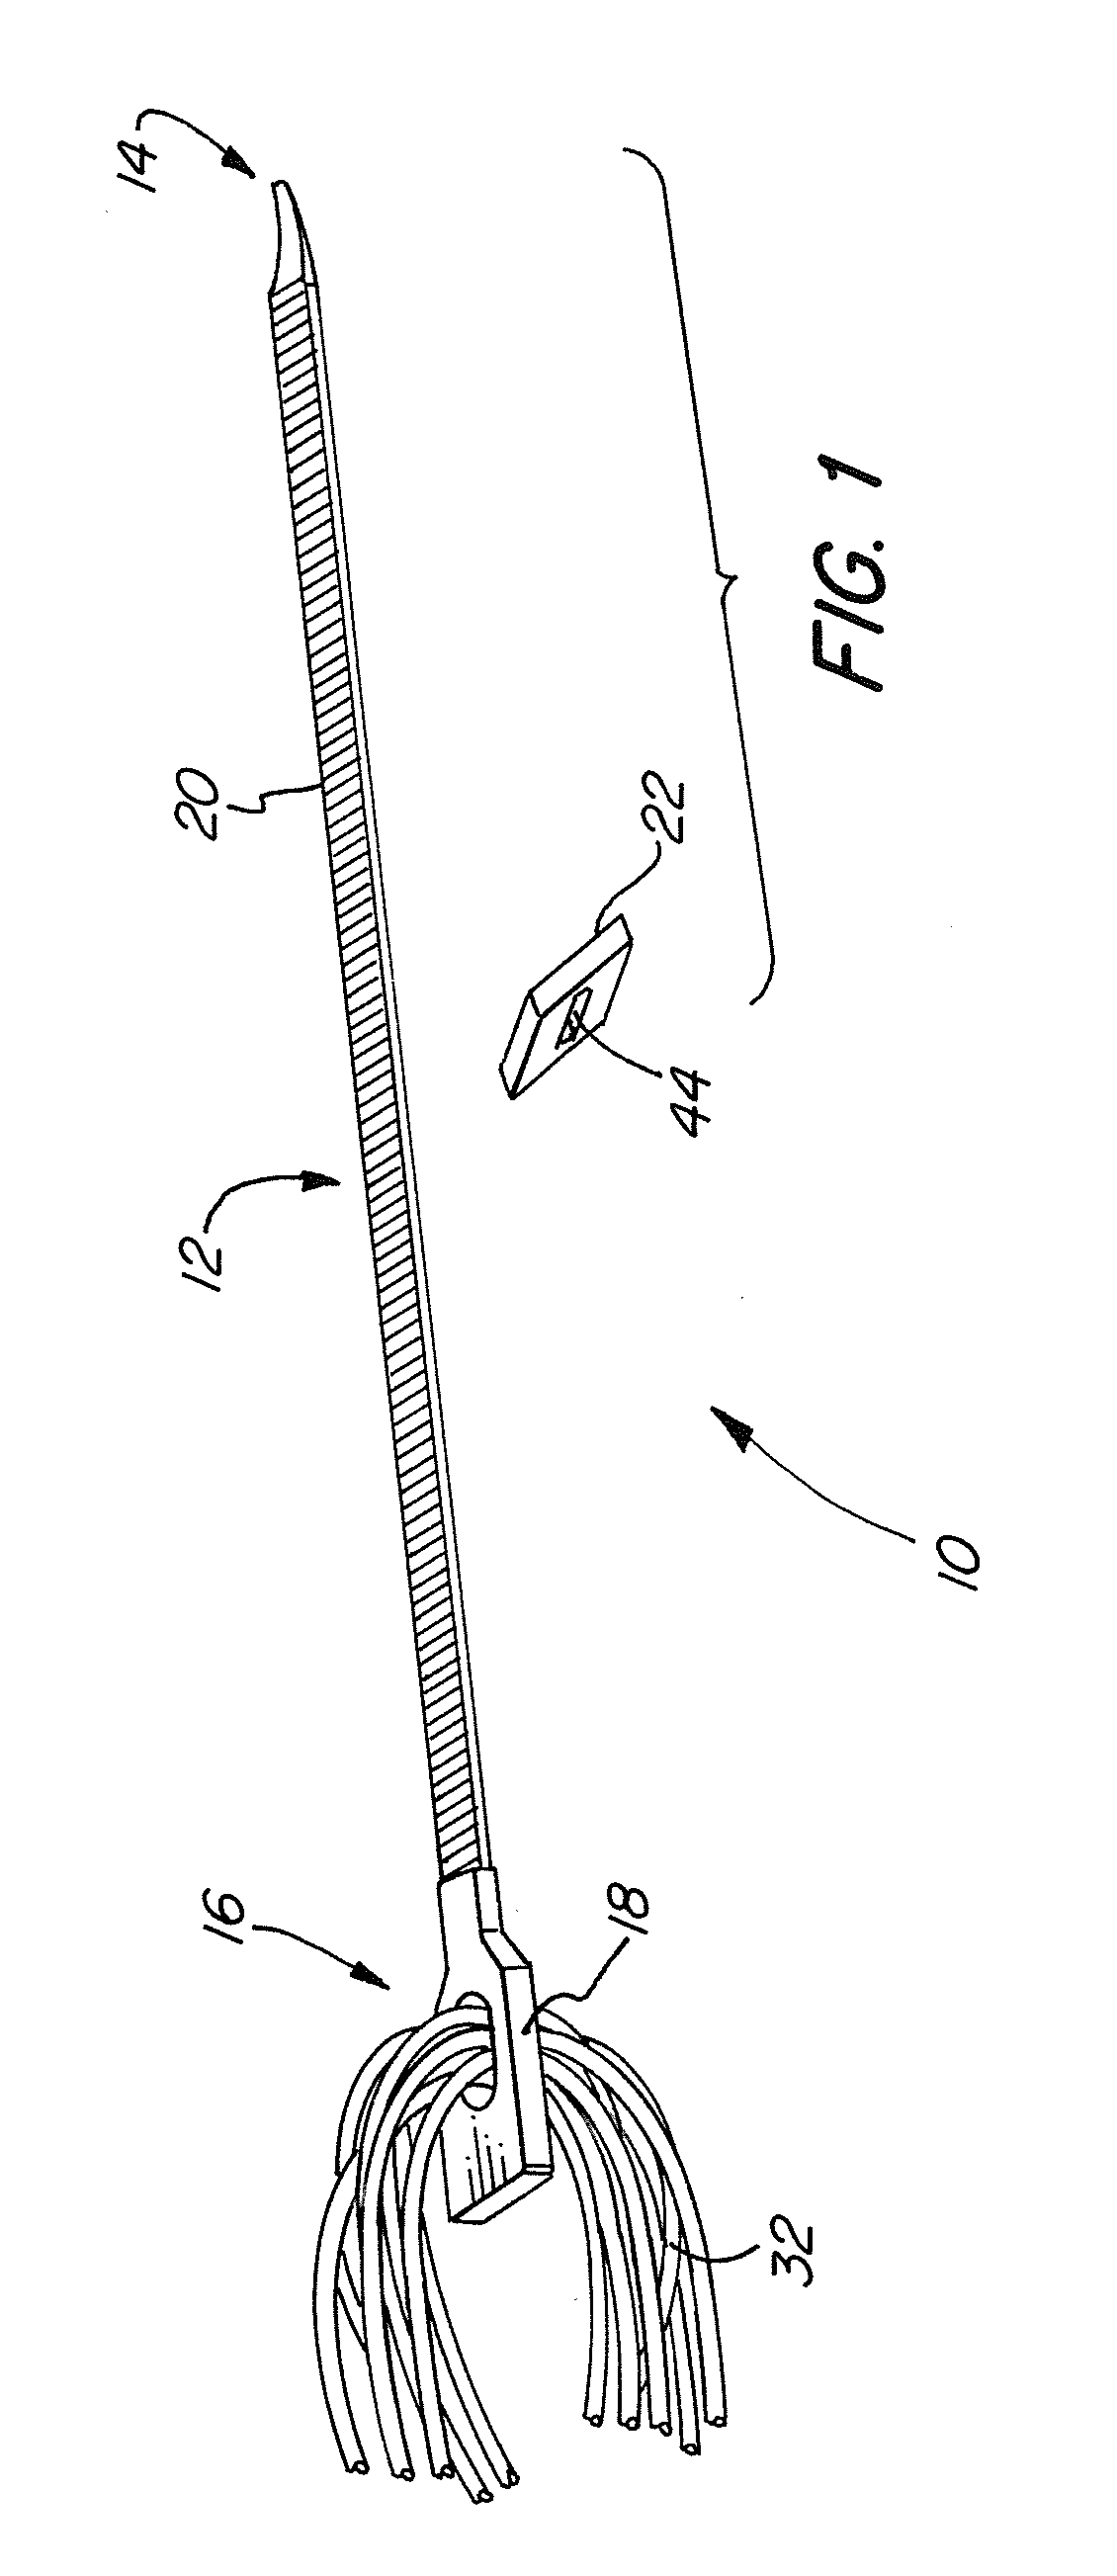 Method And Device For The Fixation Of A Tendon Graft